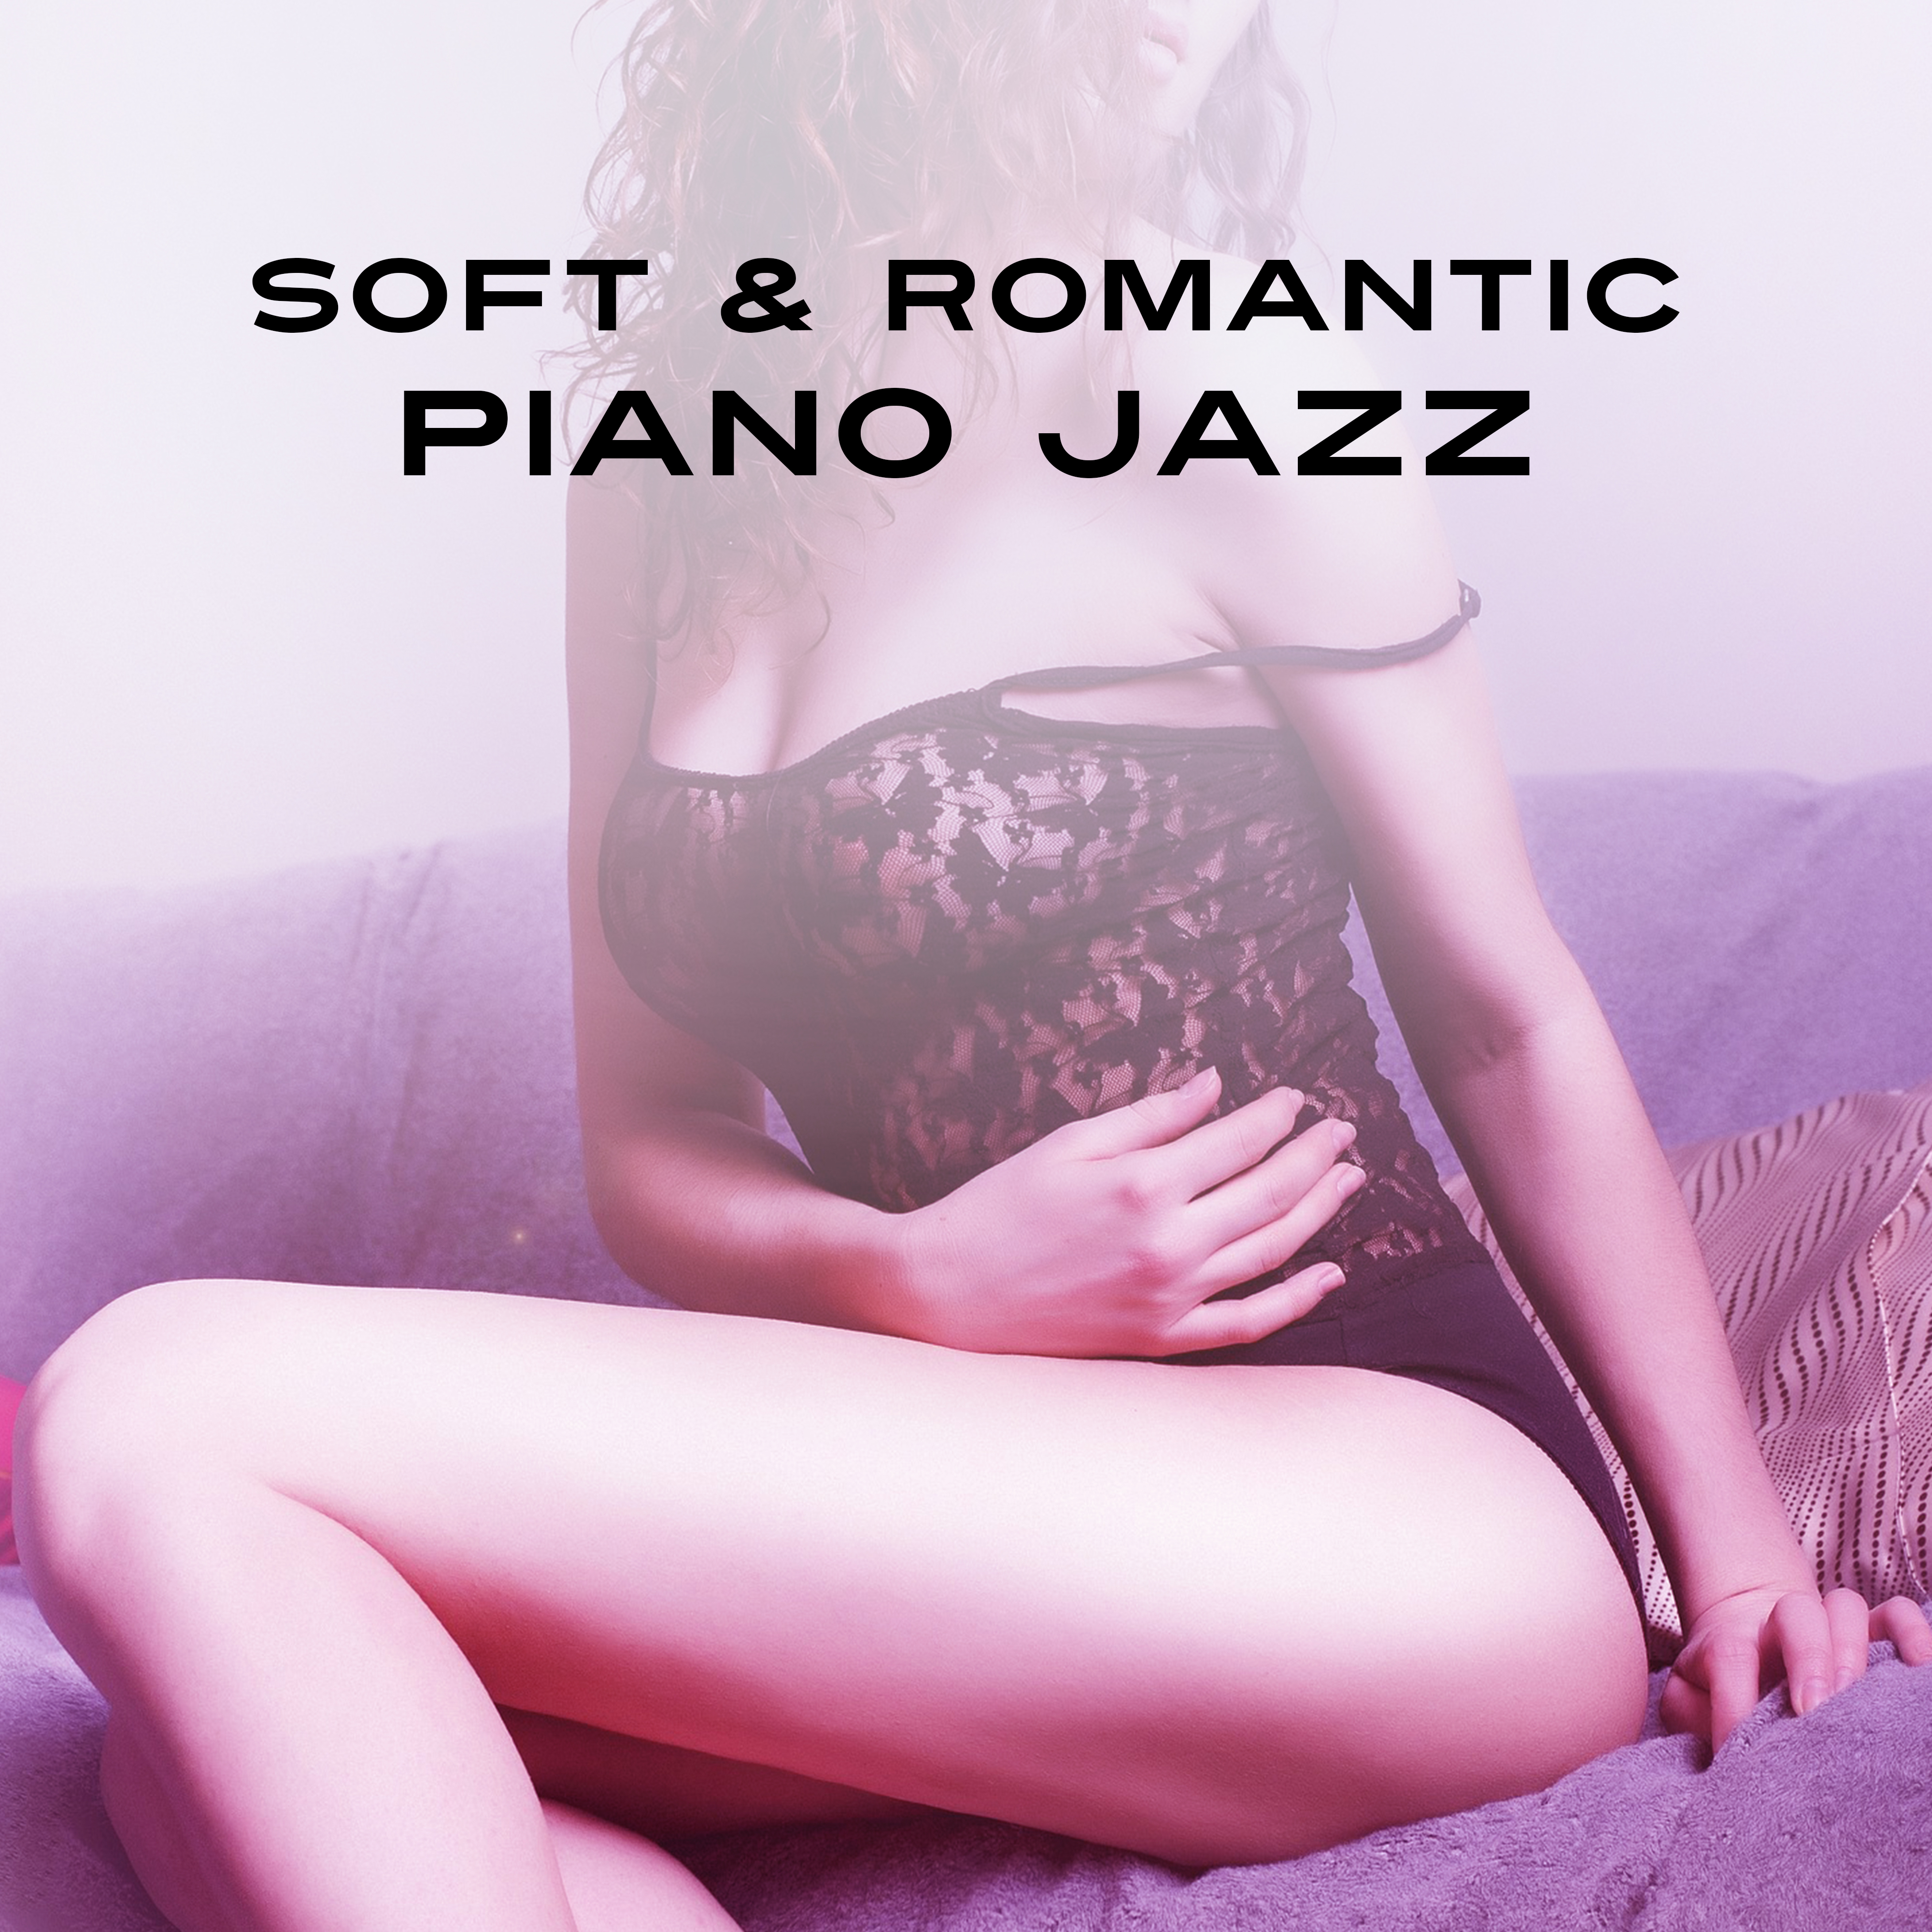 Soft  Romantic Piano Jazz  Evening Relaxation, Sounds for Lovers, Easy Listening